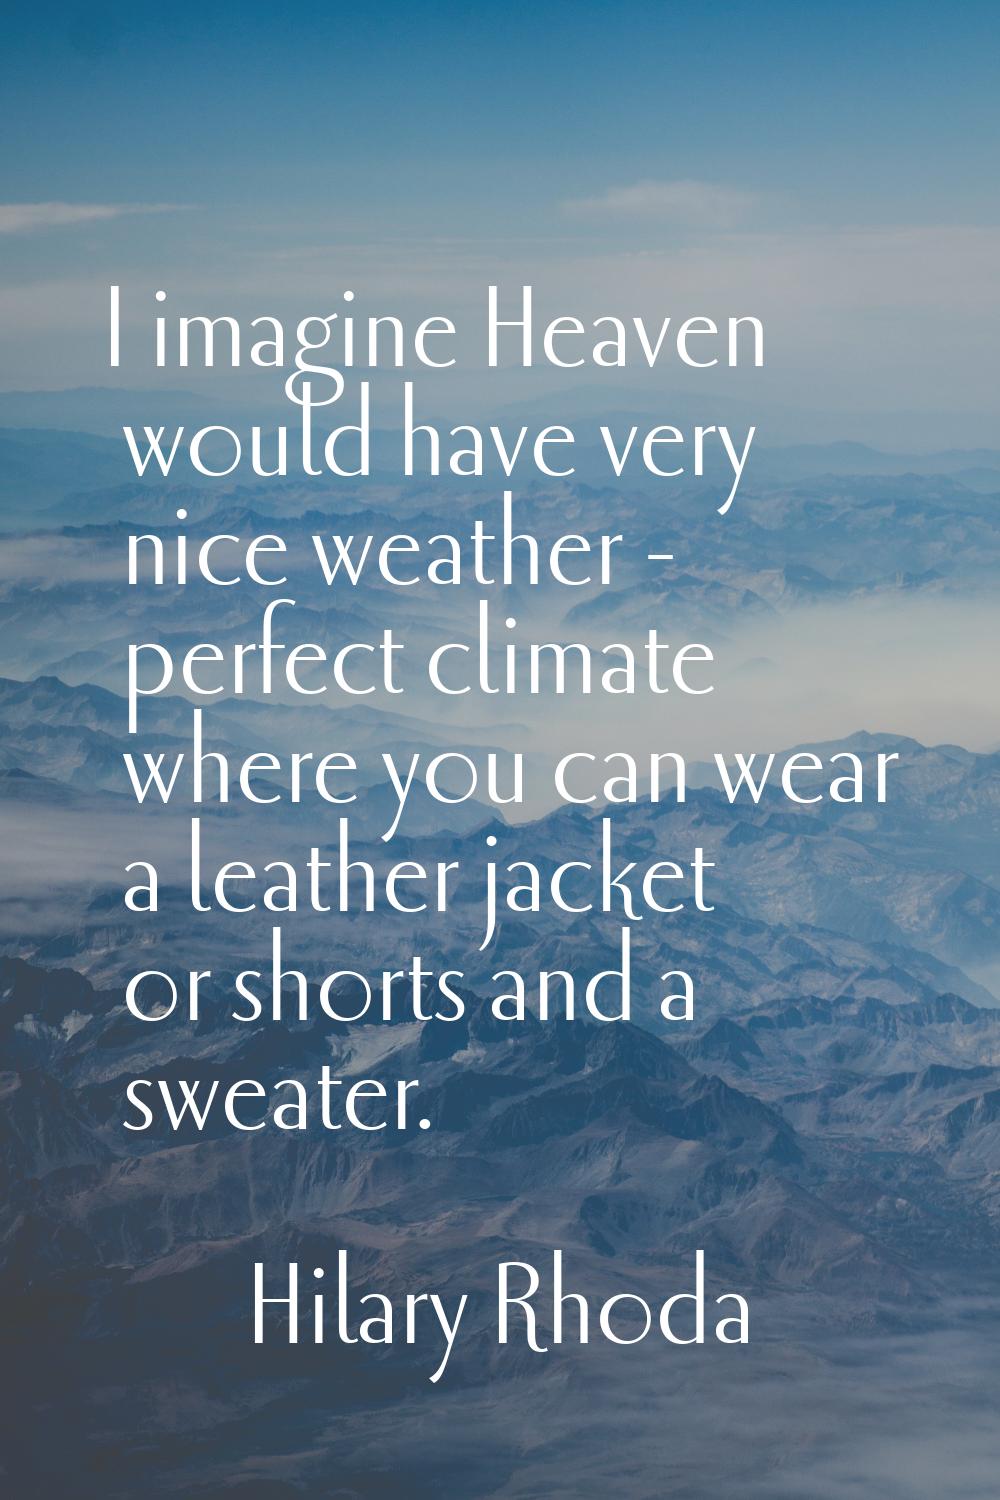 I imagine Heaven would have very nice weather - perfect climate where you can wear a leather jacket